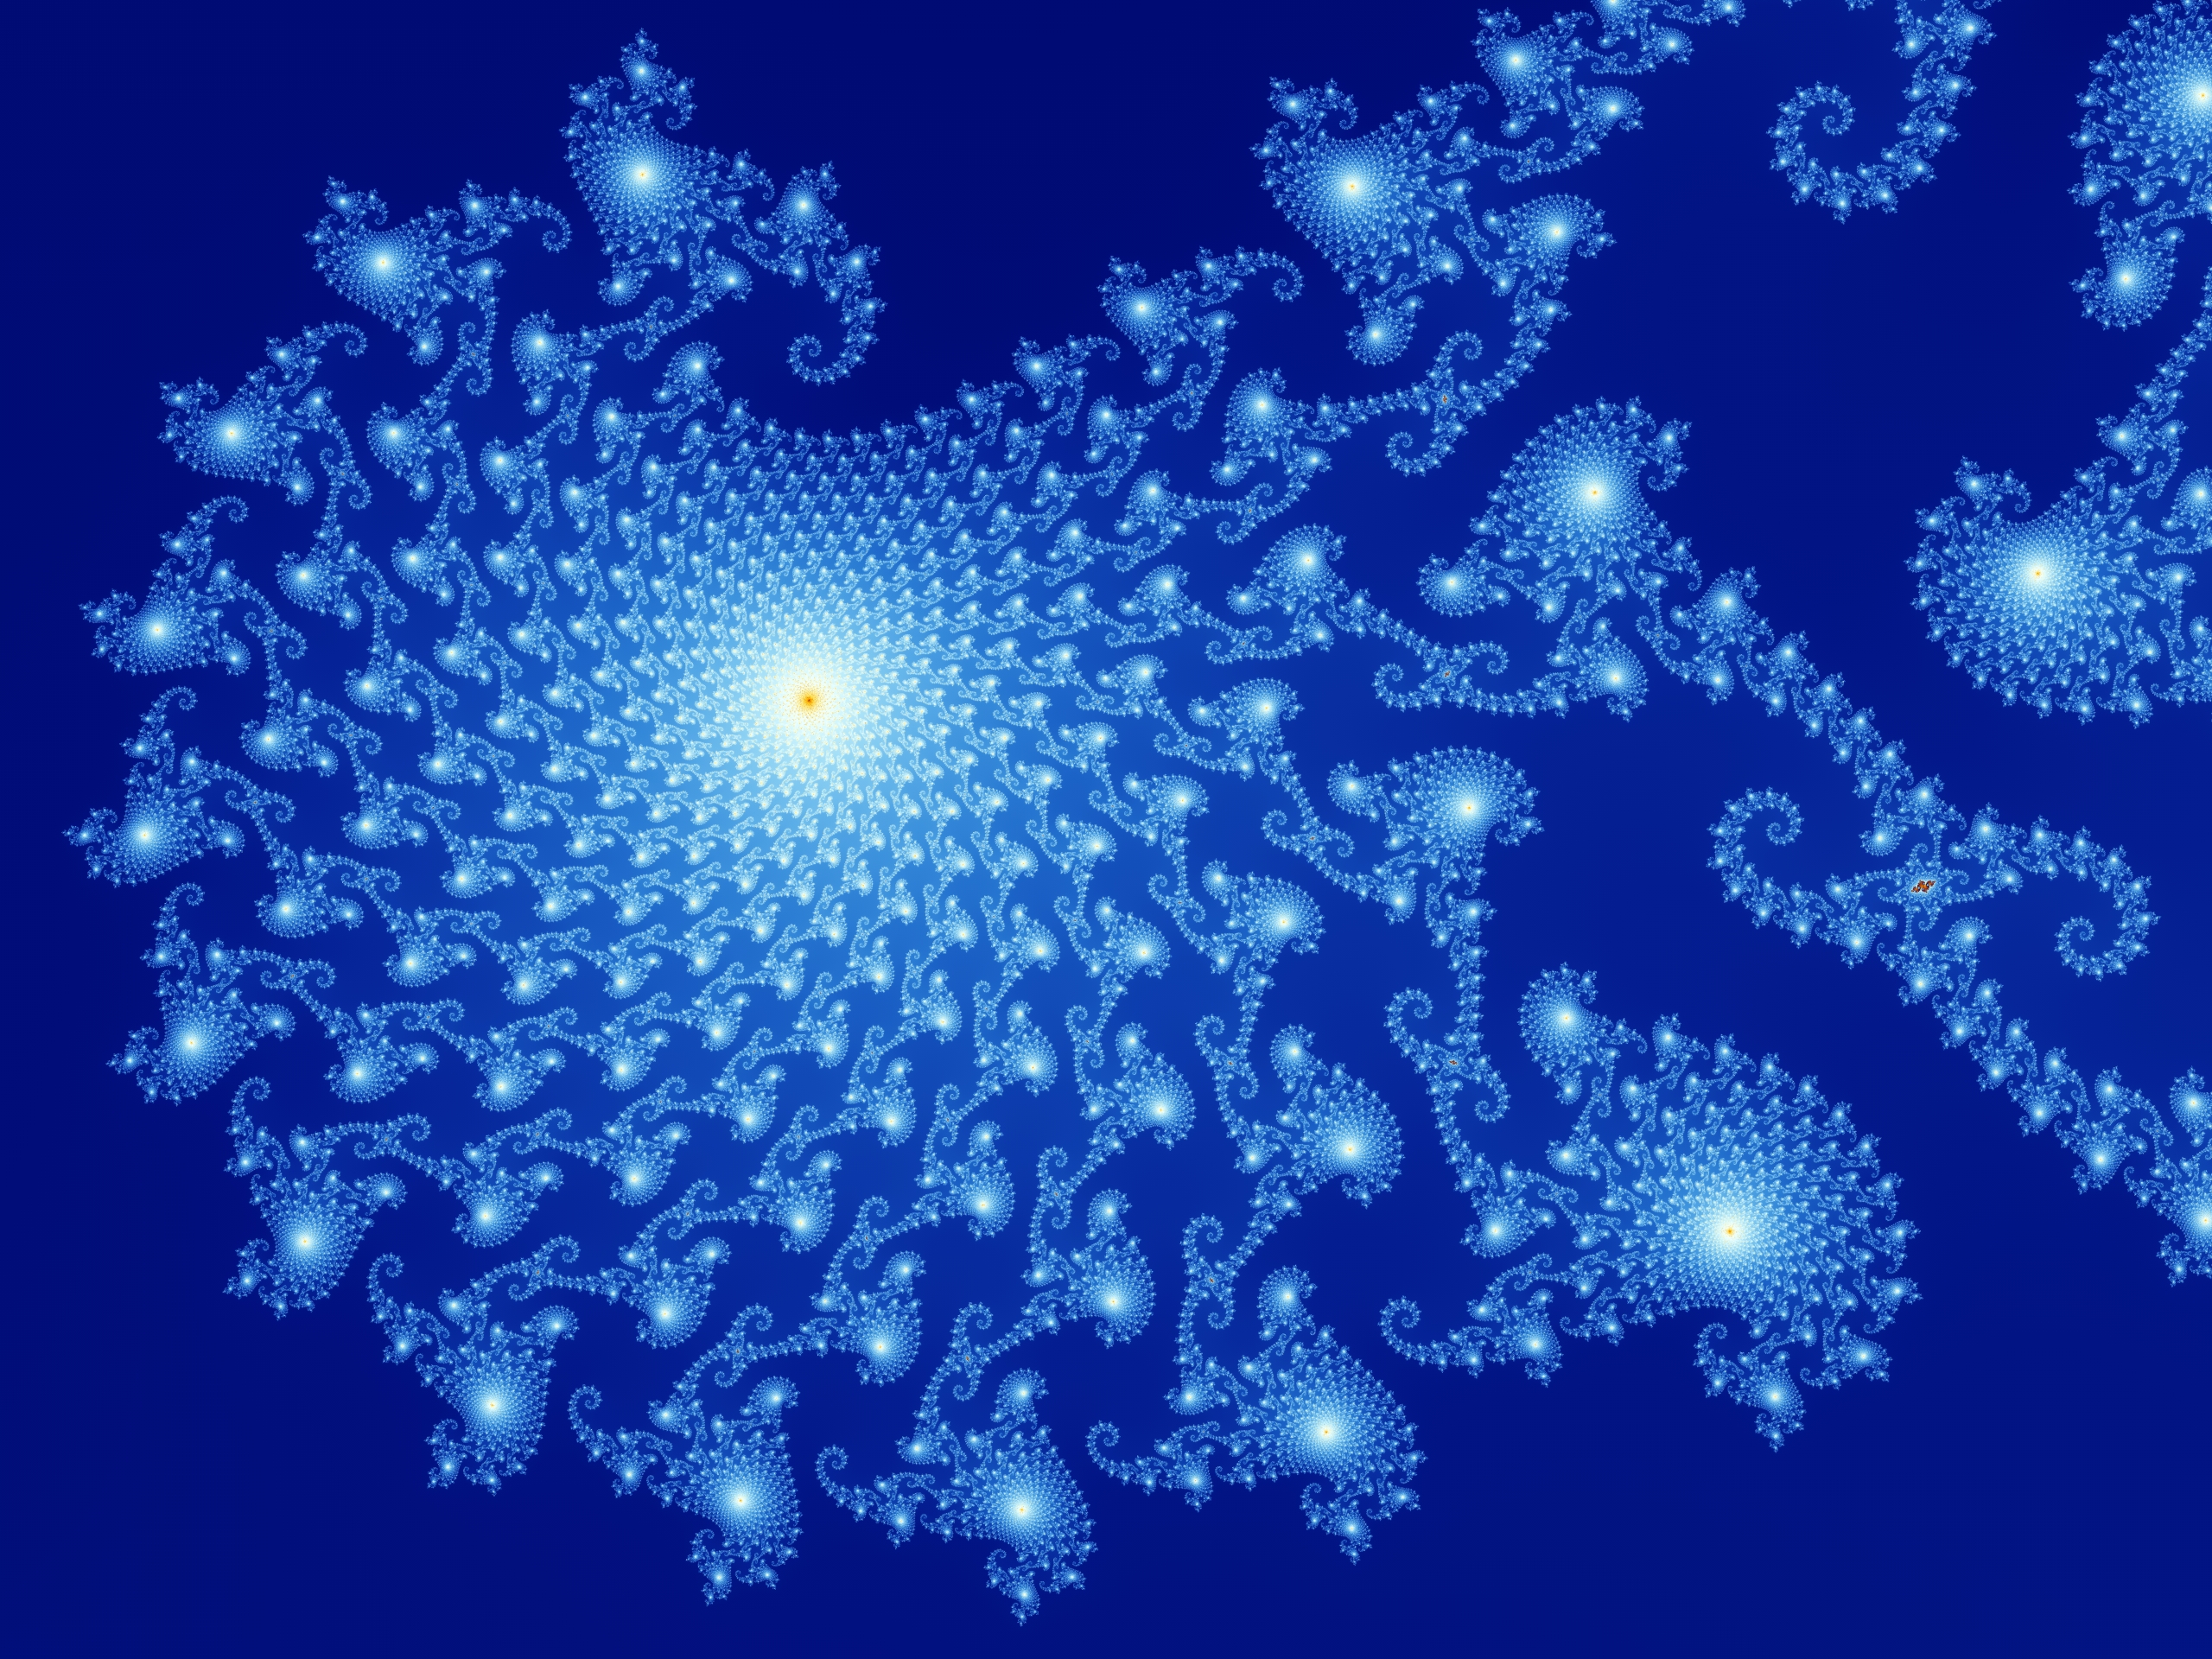 WallpapersWidecom  High Resolution Desktop Wallpapers tagged with  mandelbrot  Page 1